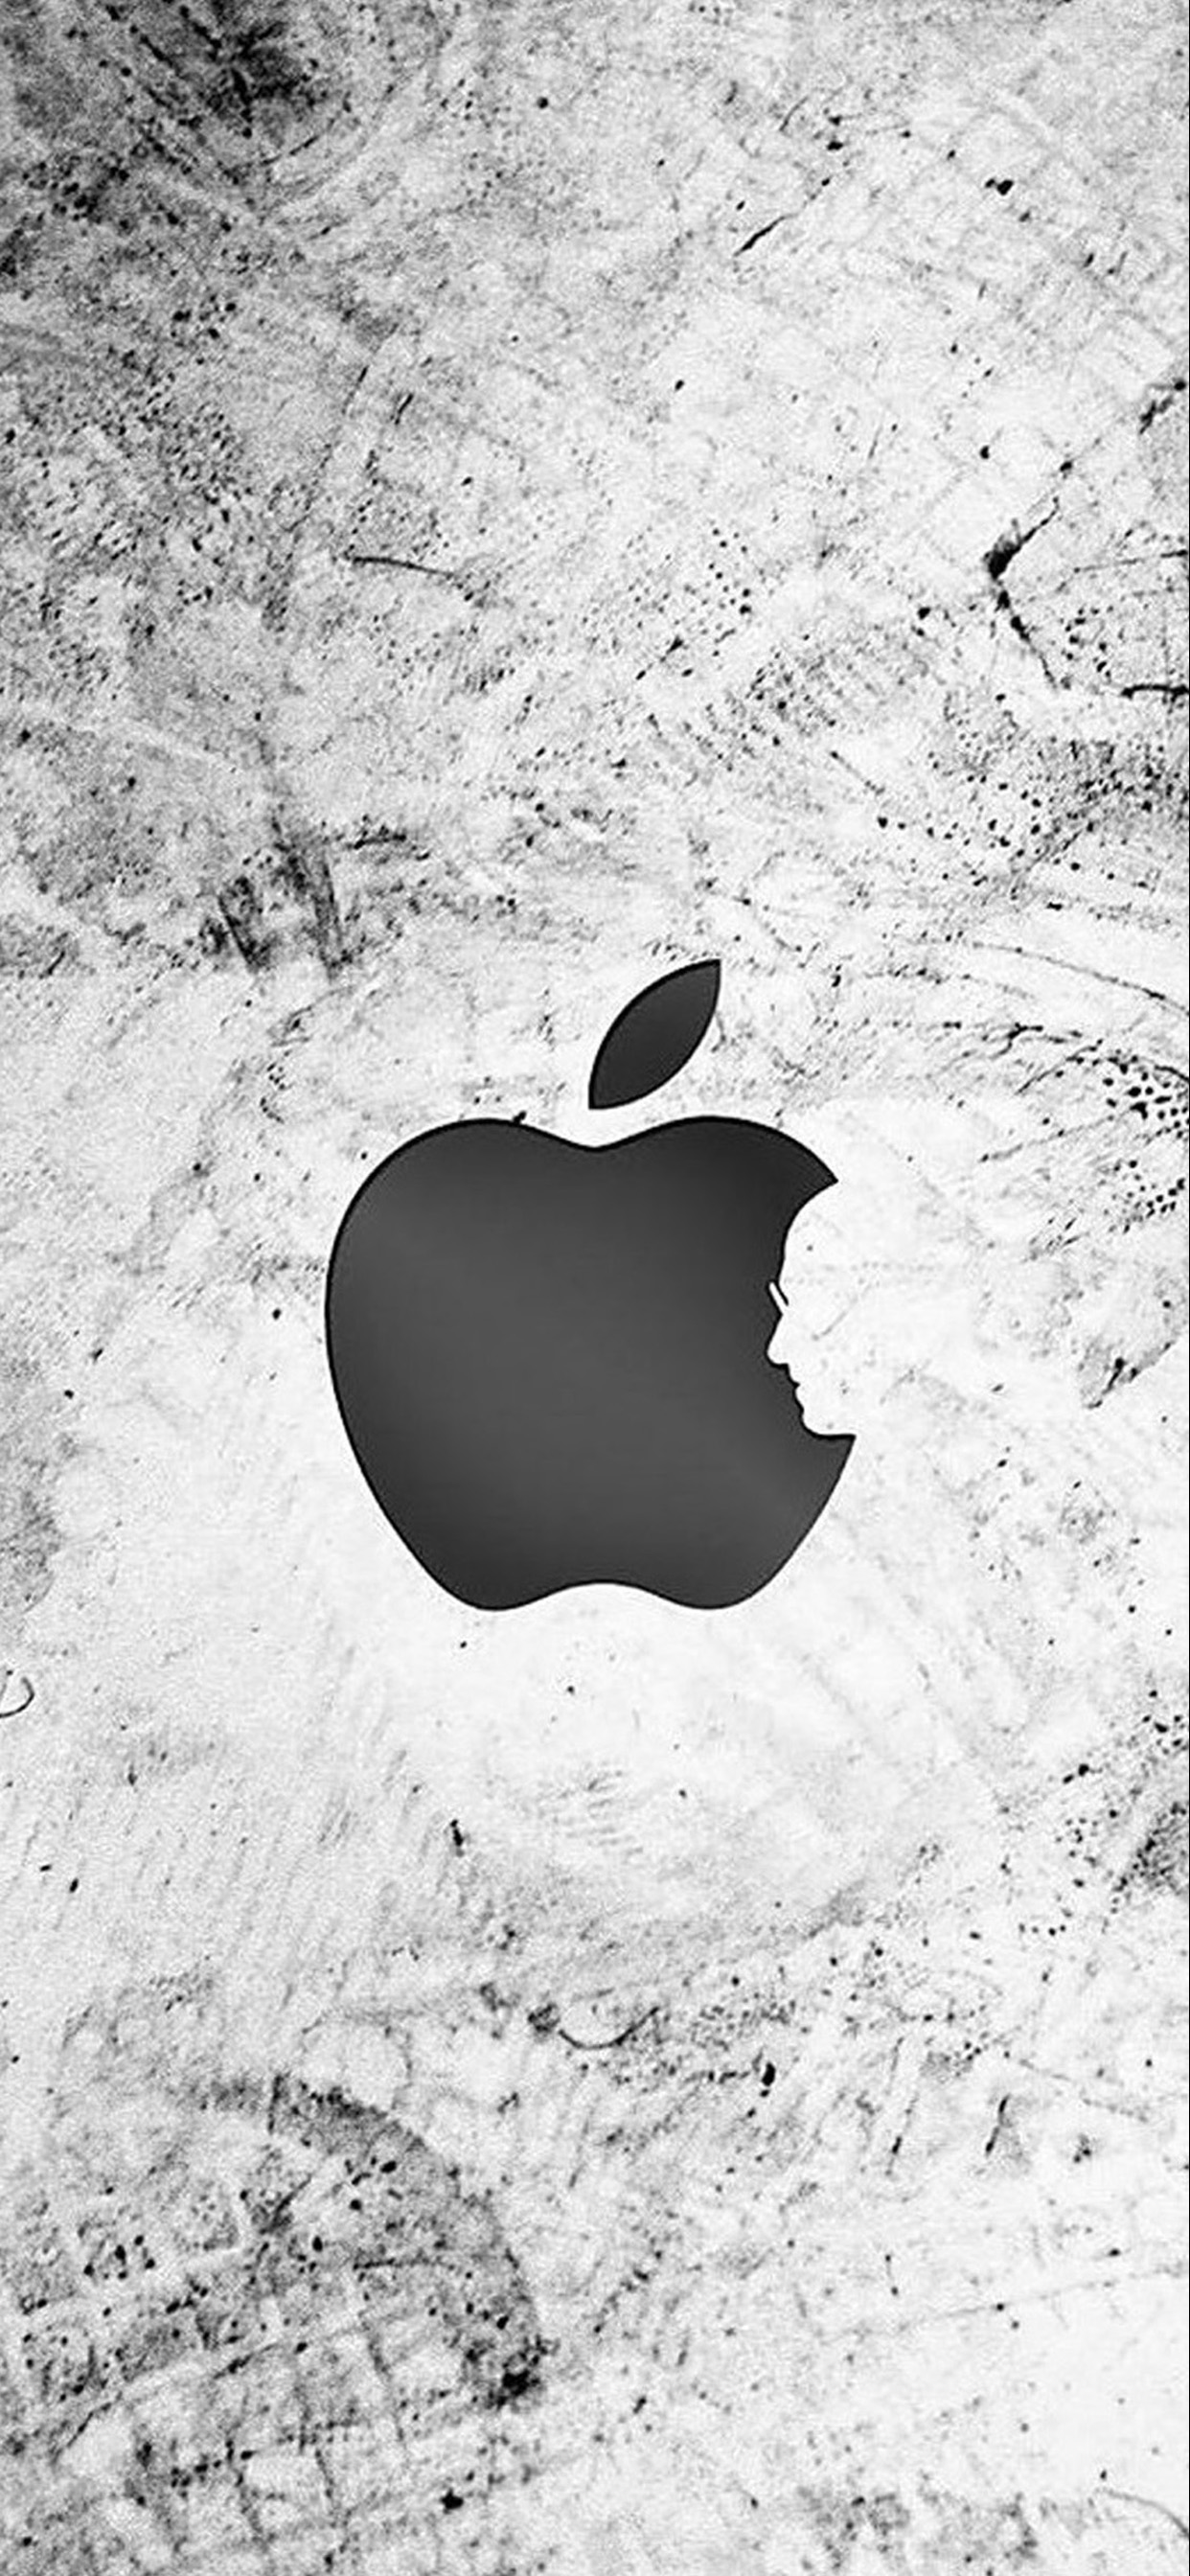 Wallpaper White Apple Logo on Black and White Surface Background   Download Free Image